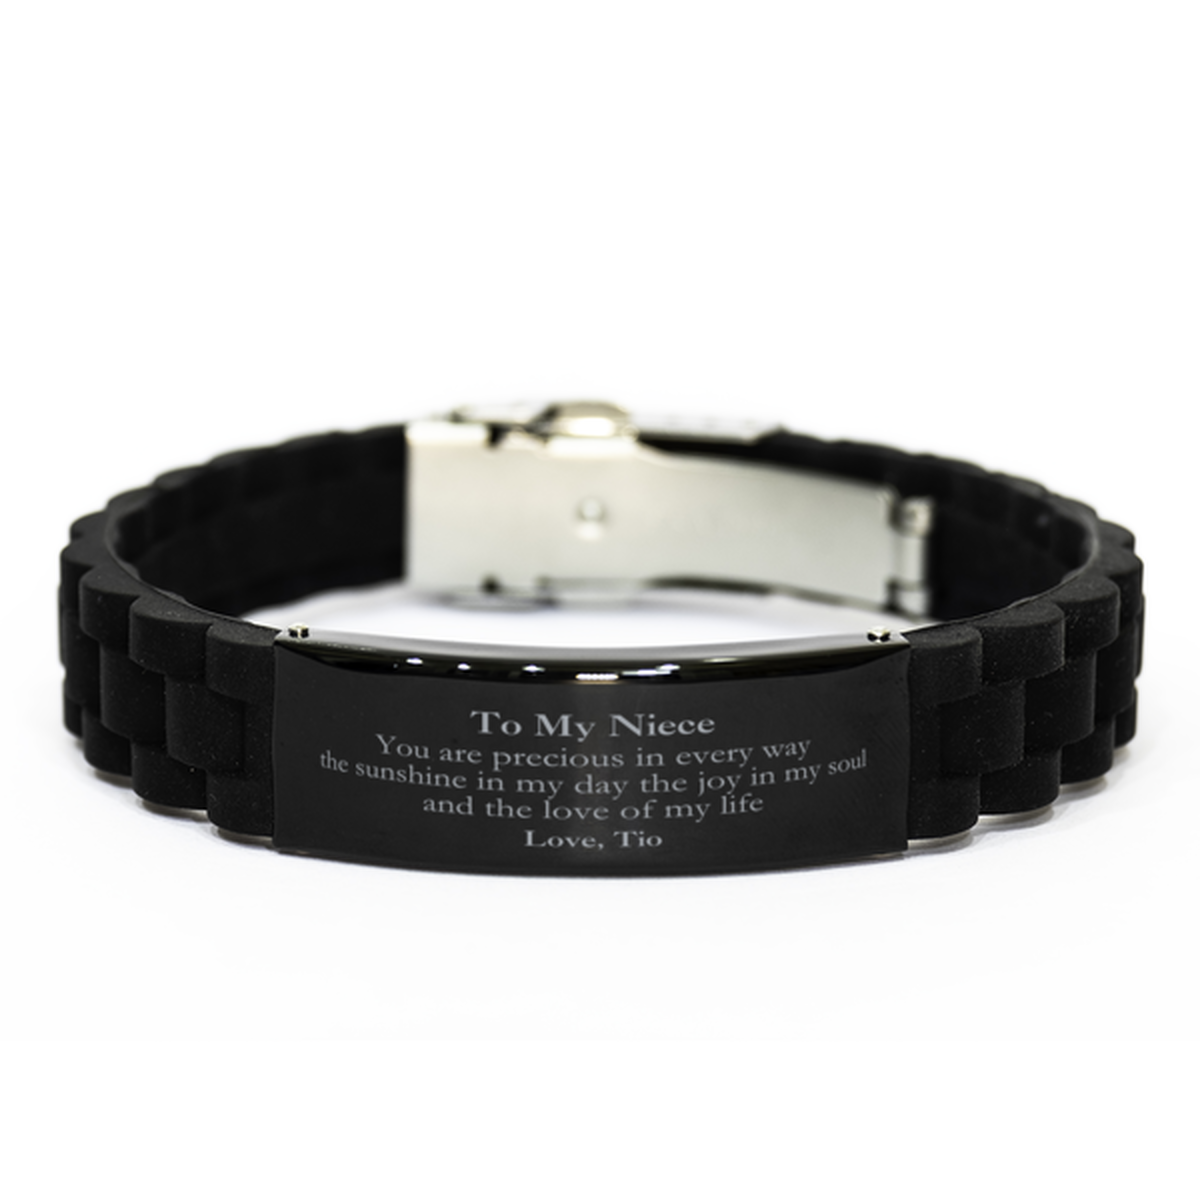 Graduation Gifts for Niece Black Glidelock Clasp Bracelet Present from Tio, Christmas Niece Birthday Gifts Niece You are precious in every way the sunshine in my day. Love, Tio